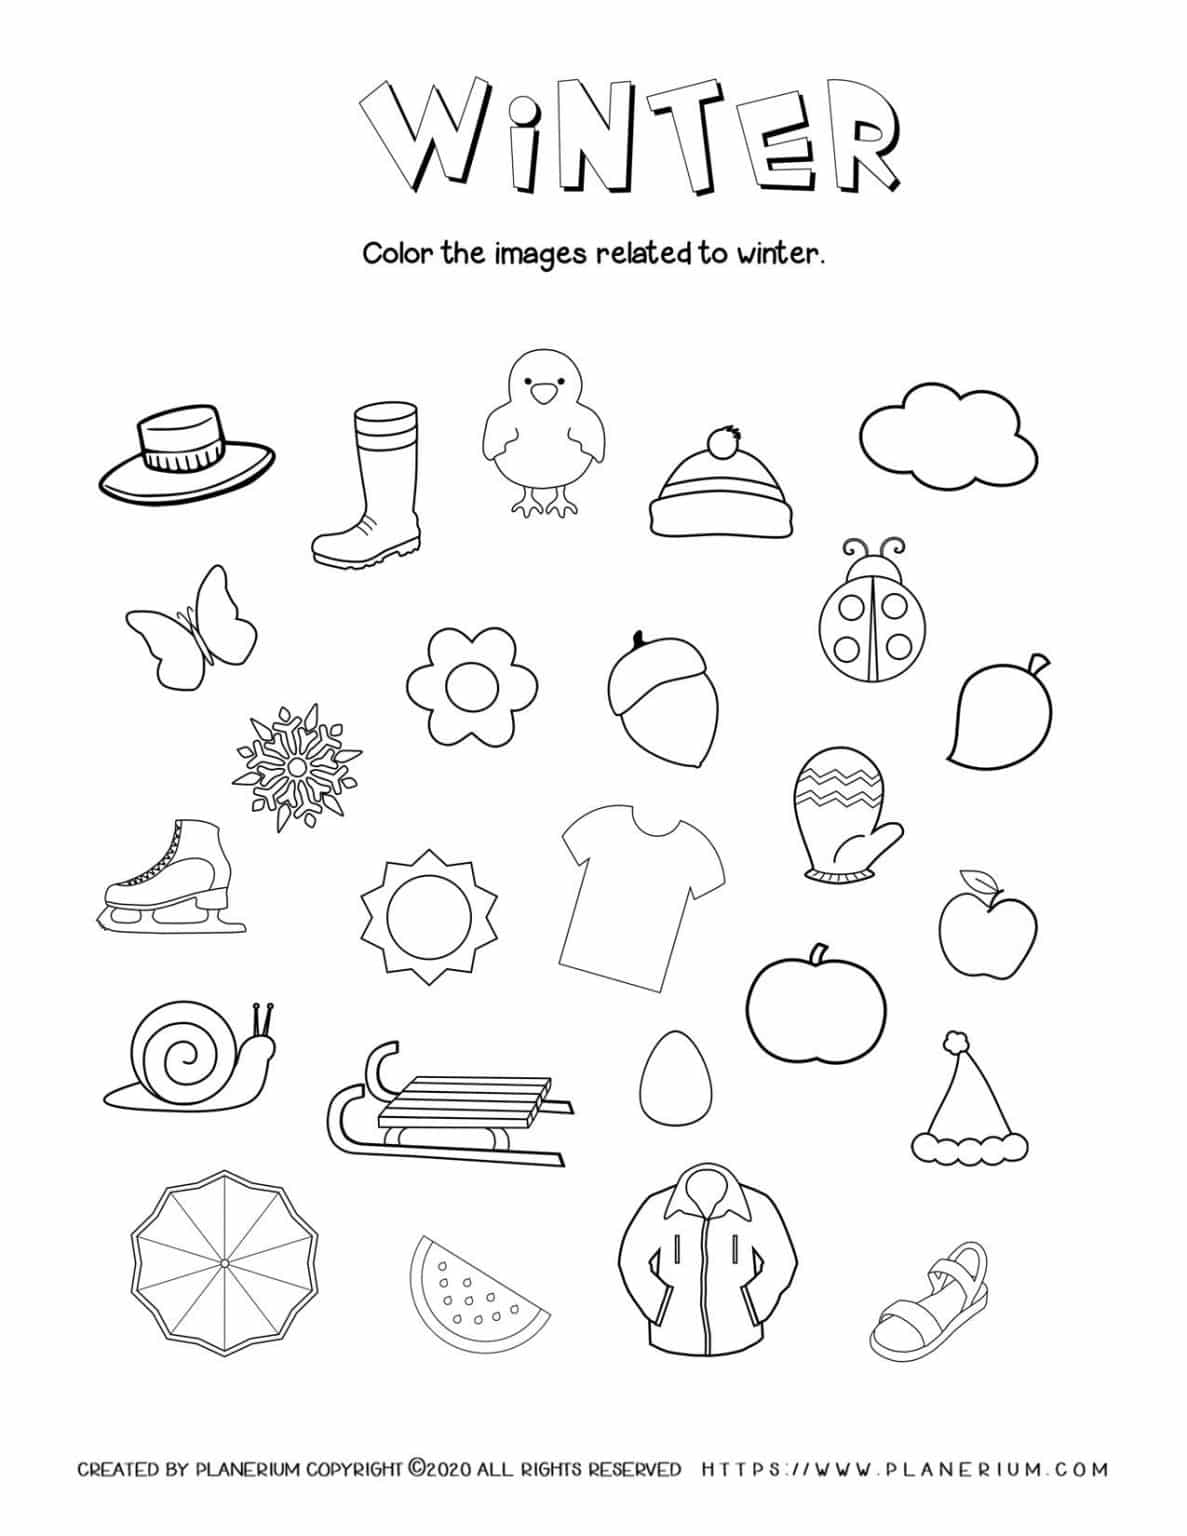 winter-worksheet-color-related-objects-free-printable-planerium